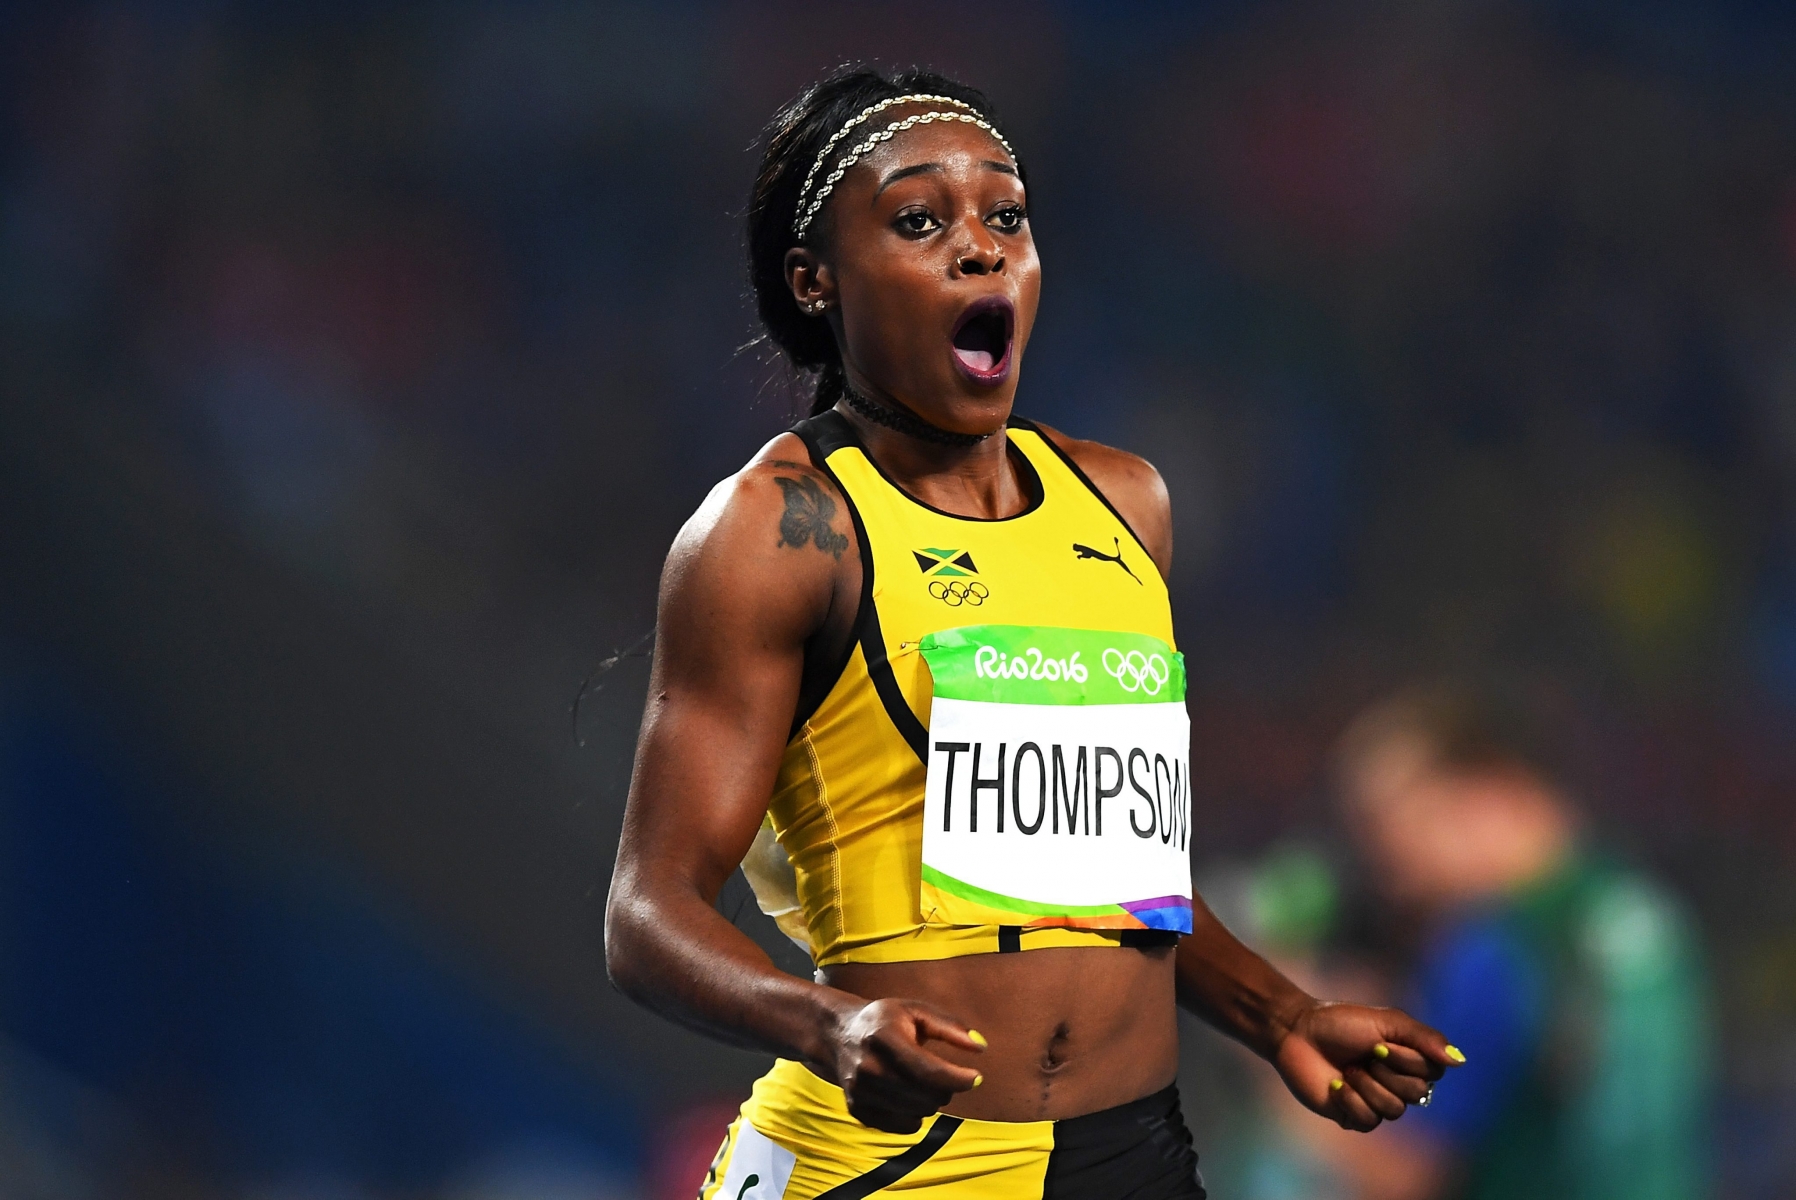 epa05495186 Elaine Thompson of Jamaica celebrates after winnig the women's 200m final of the Rio 2016 Olympic Games Athletics, Track and Field events at the Olympic Stadium in Rio de Janeiro, Brazil, 17 August 2016  EPA/LUKAS COCH   AUSTRALIA AND NEW ZEALAND OUT BRAZIL RIO 2016 OLYMPIC GAMES